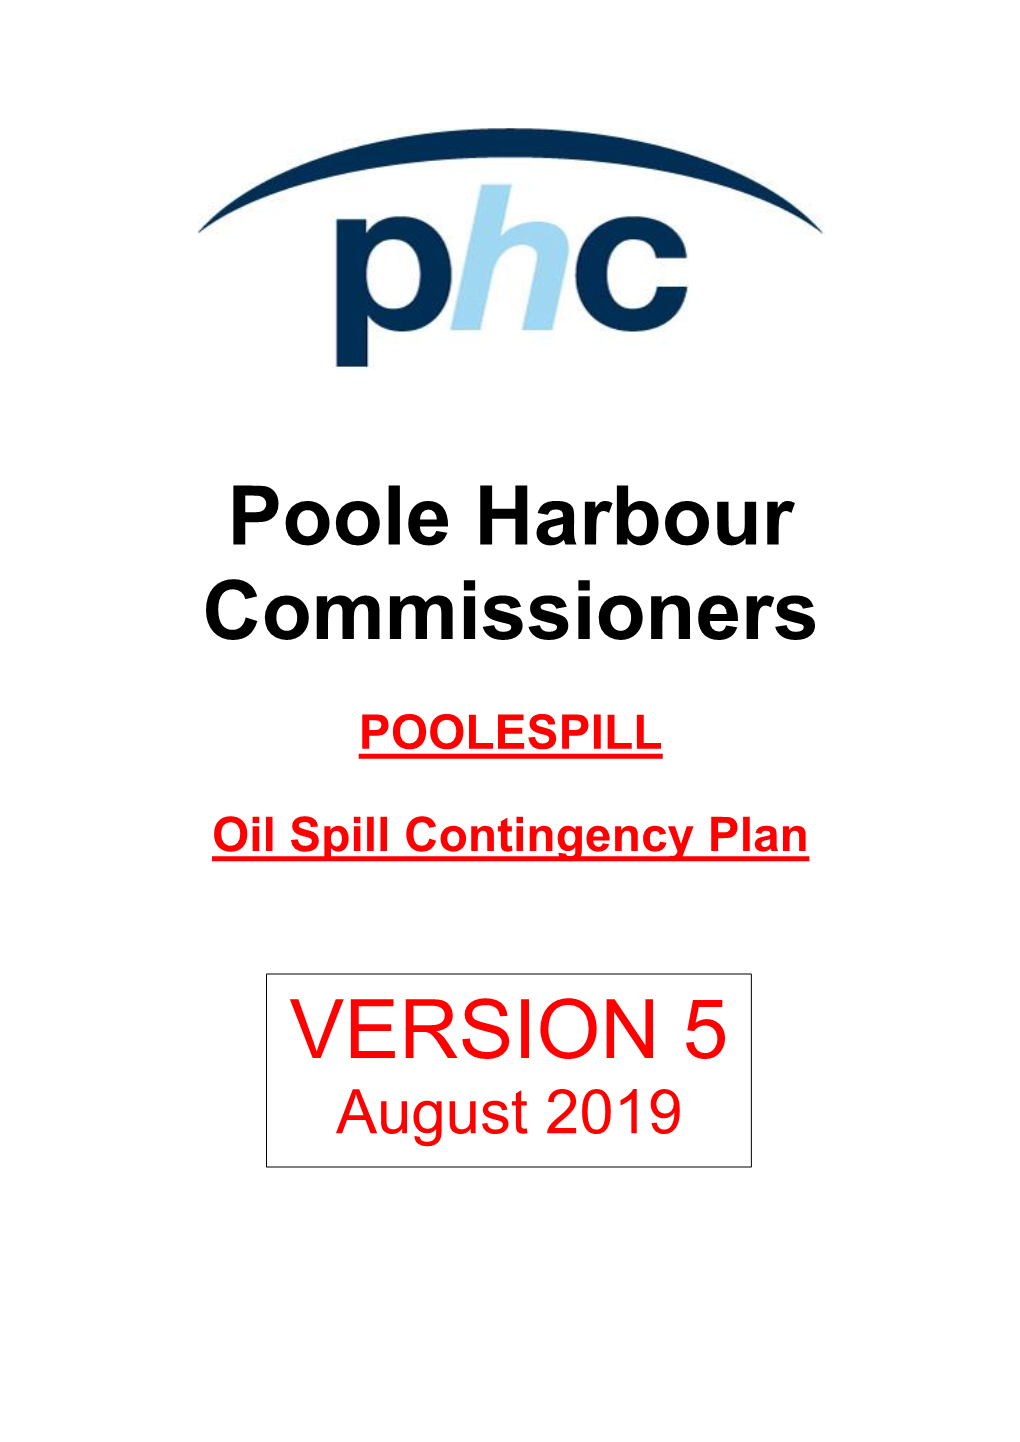 POOLESPILL Oil Spill Contingency Plan